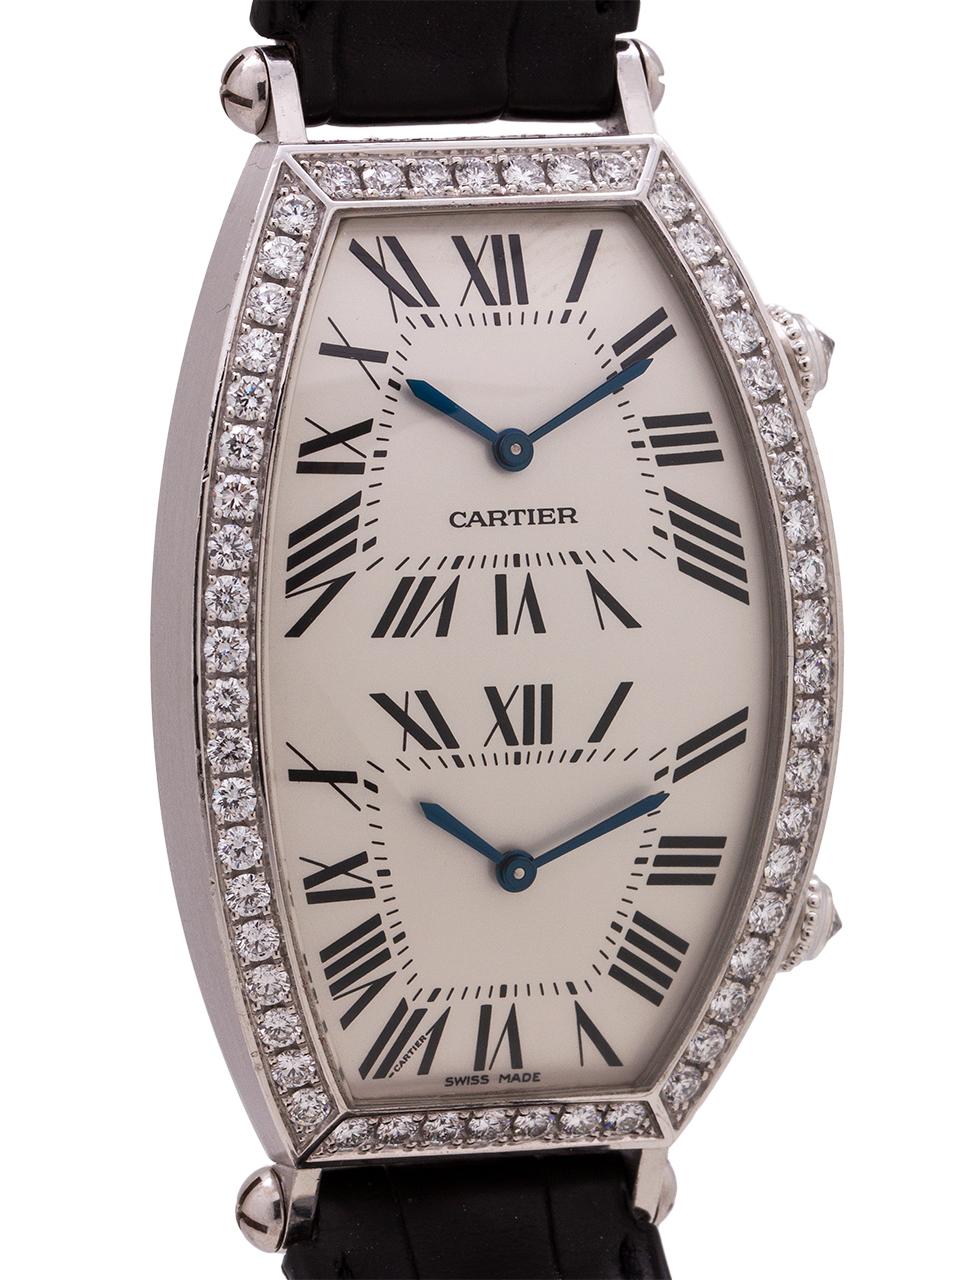   
Pristine condition man’s size Cartier 18K white gold Dual Time Tonneau, circa 2000’s with factory set diamonds. Featuring a classic tonneau case with a beautiful curved back and stylized, slightly protruding lugs. 29 X 43 mm white gold case with